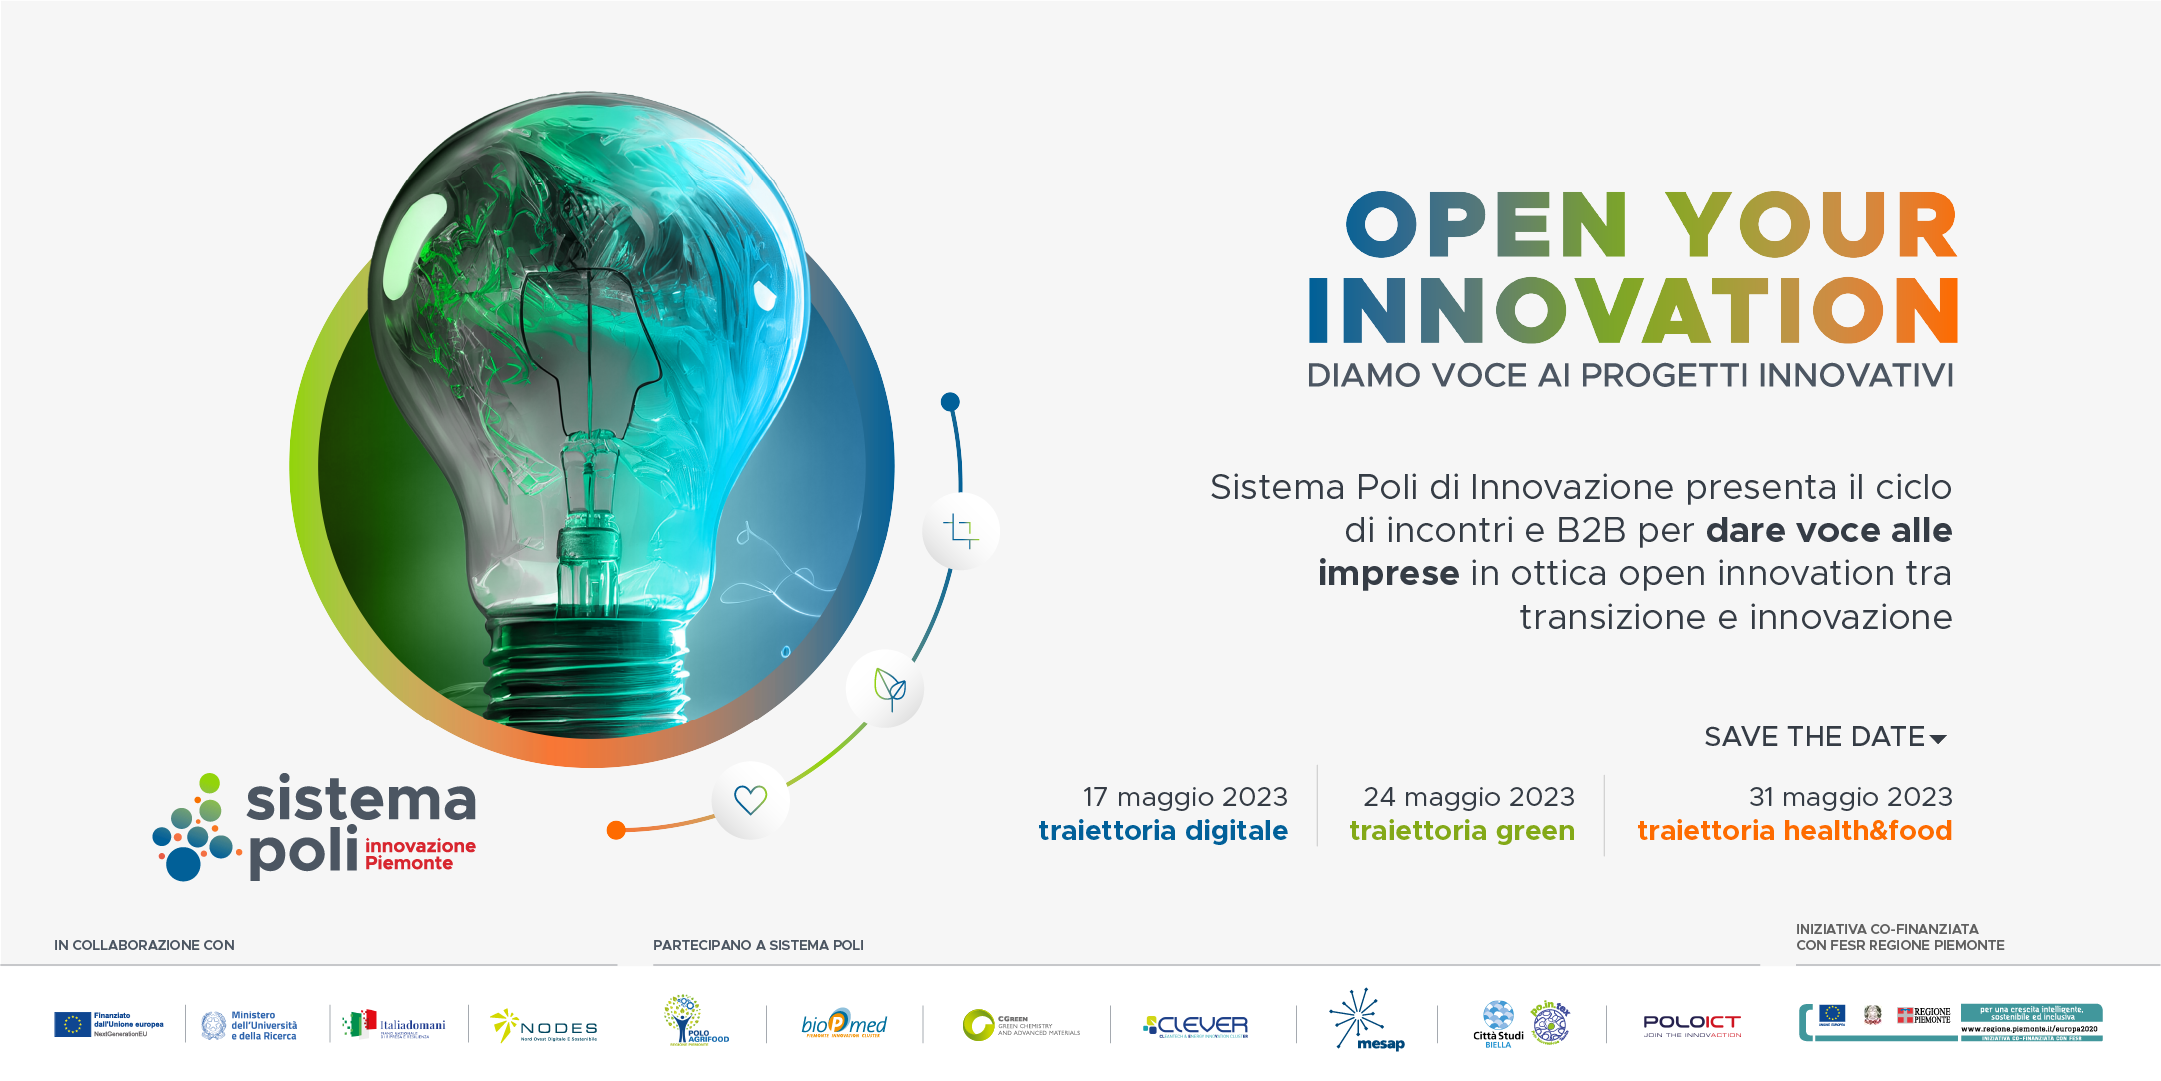 OPEN YOUR INNOVATION